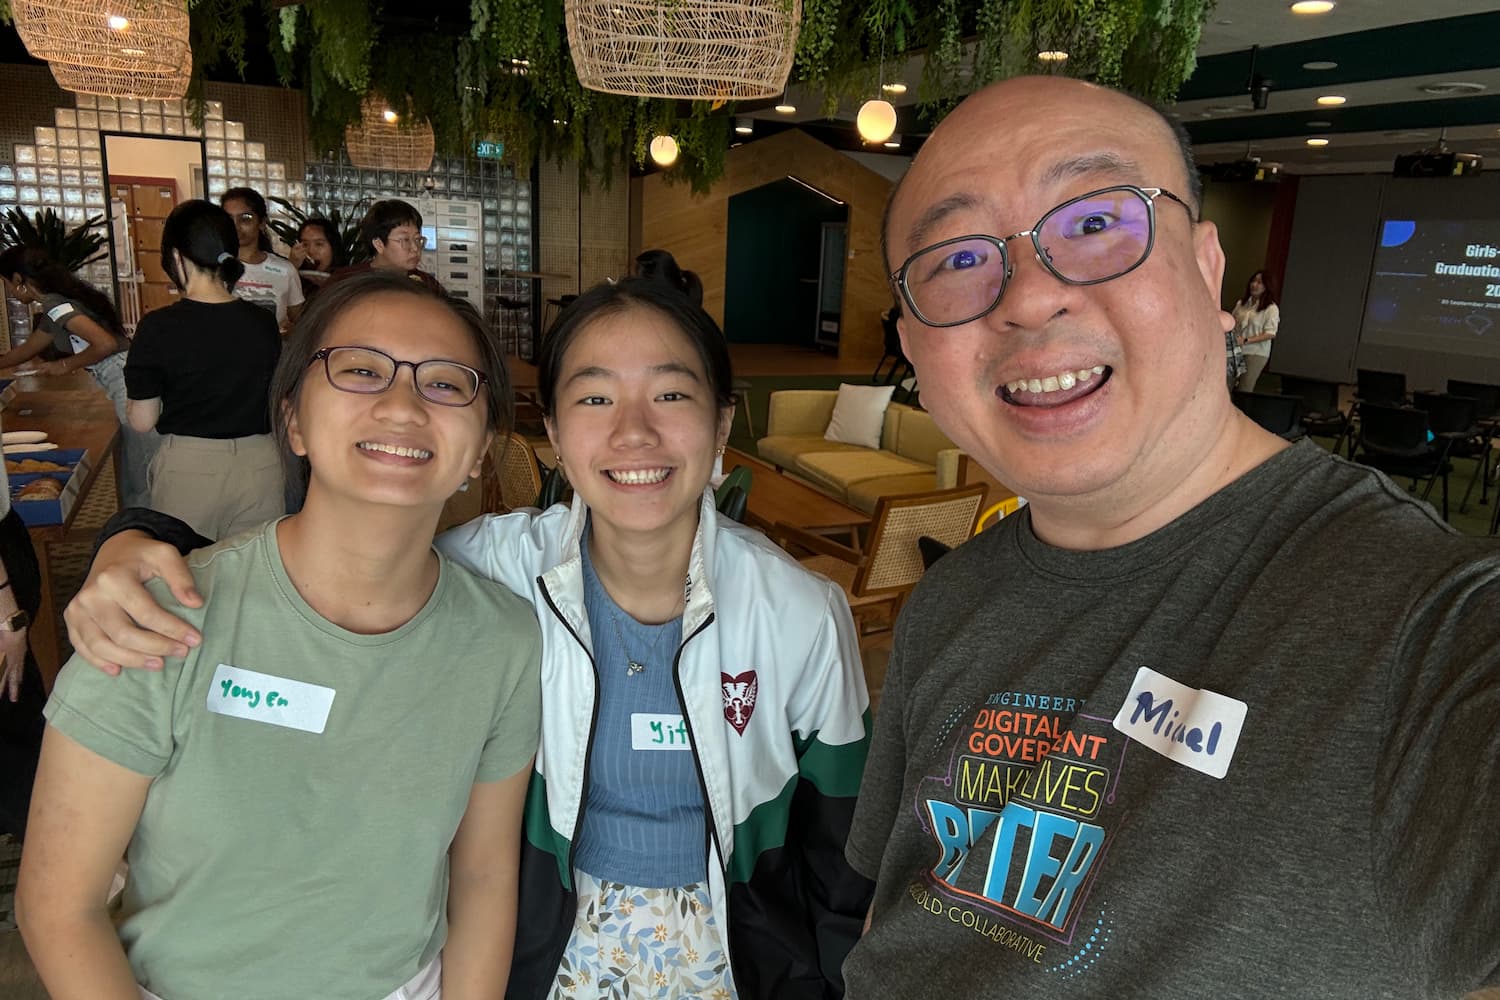 Yong En, her friend, and her mentor, Michael taking a picture together at a GovTech event